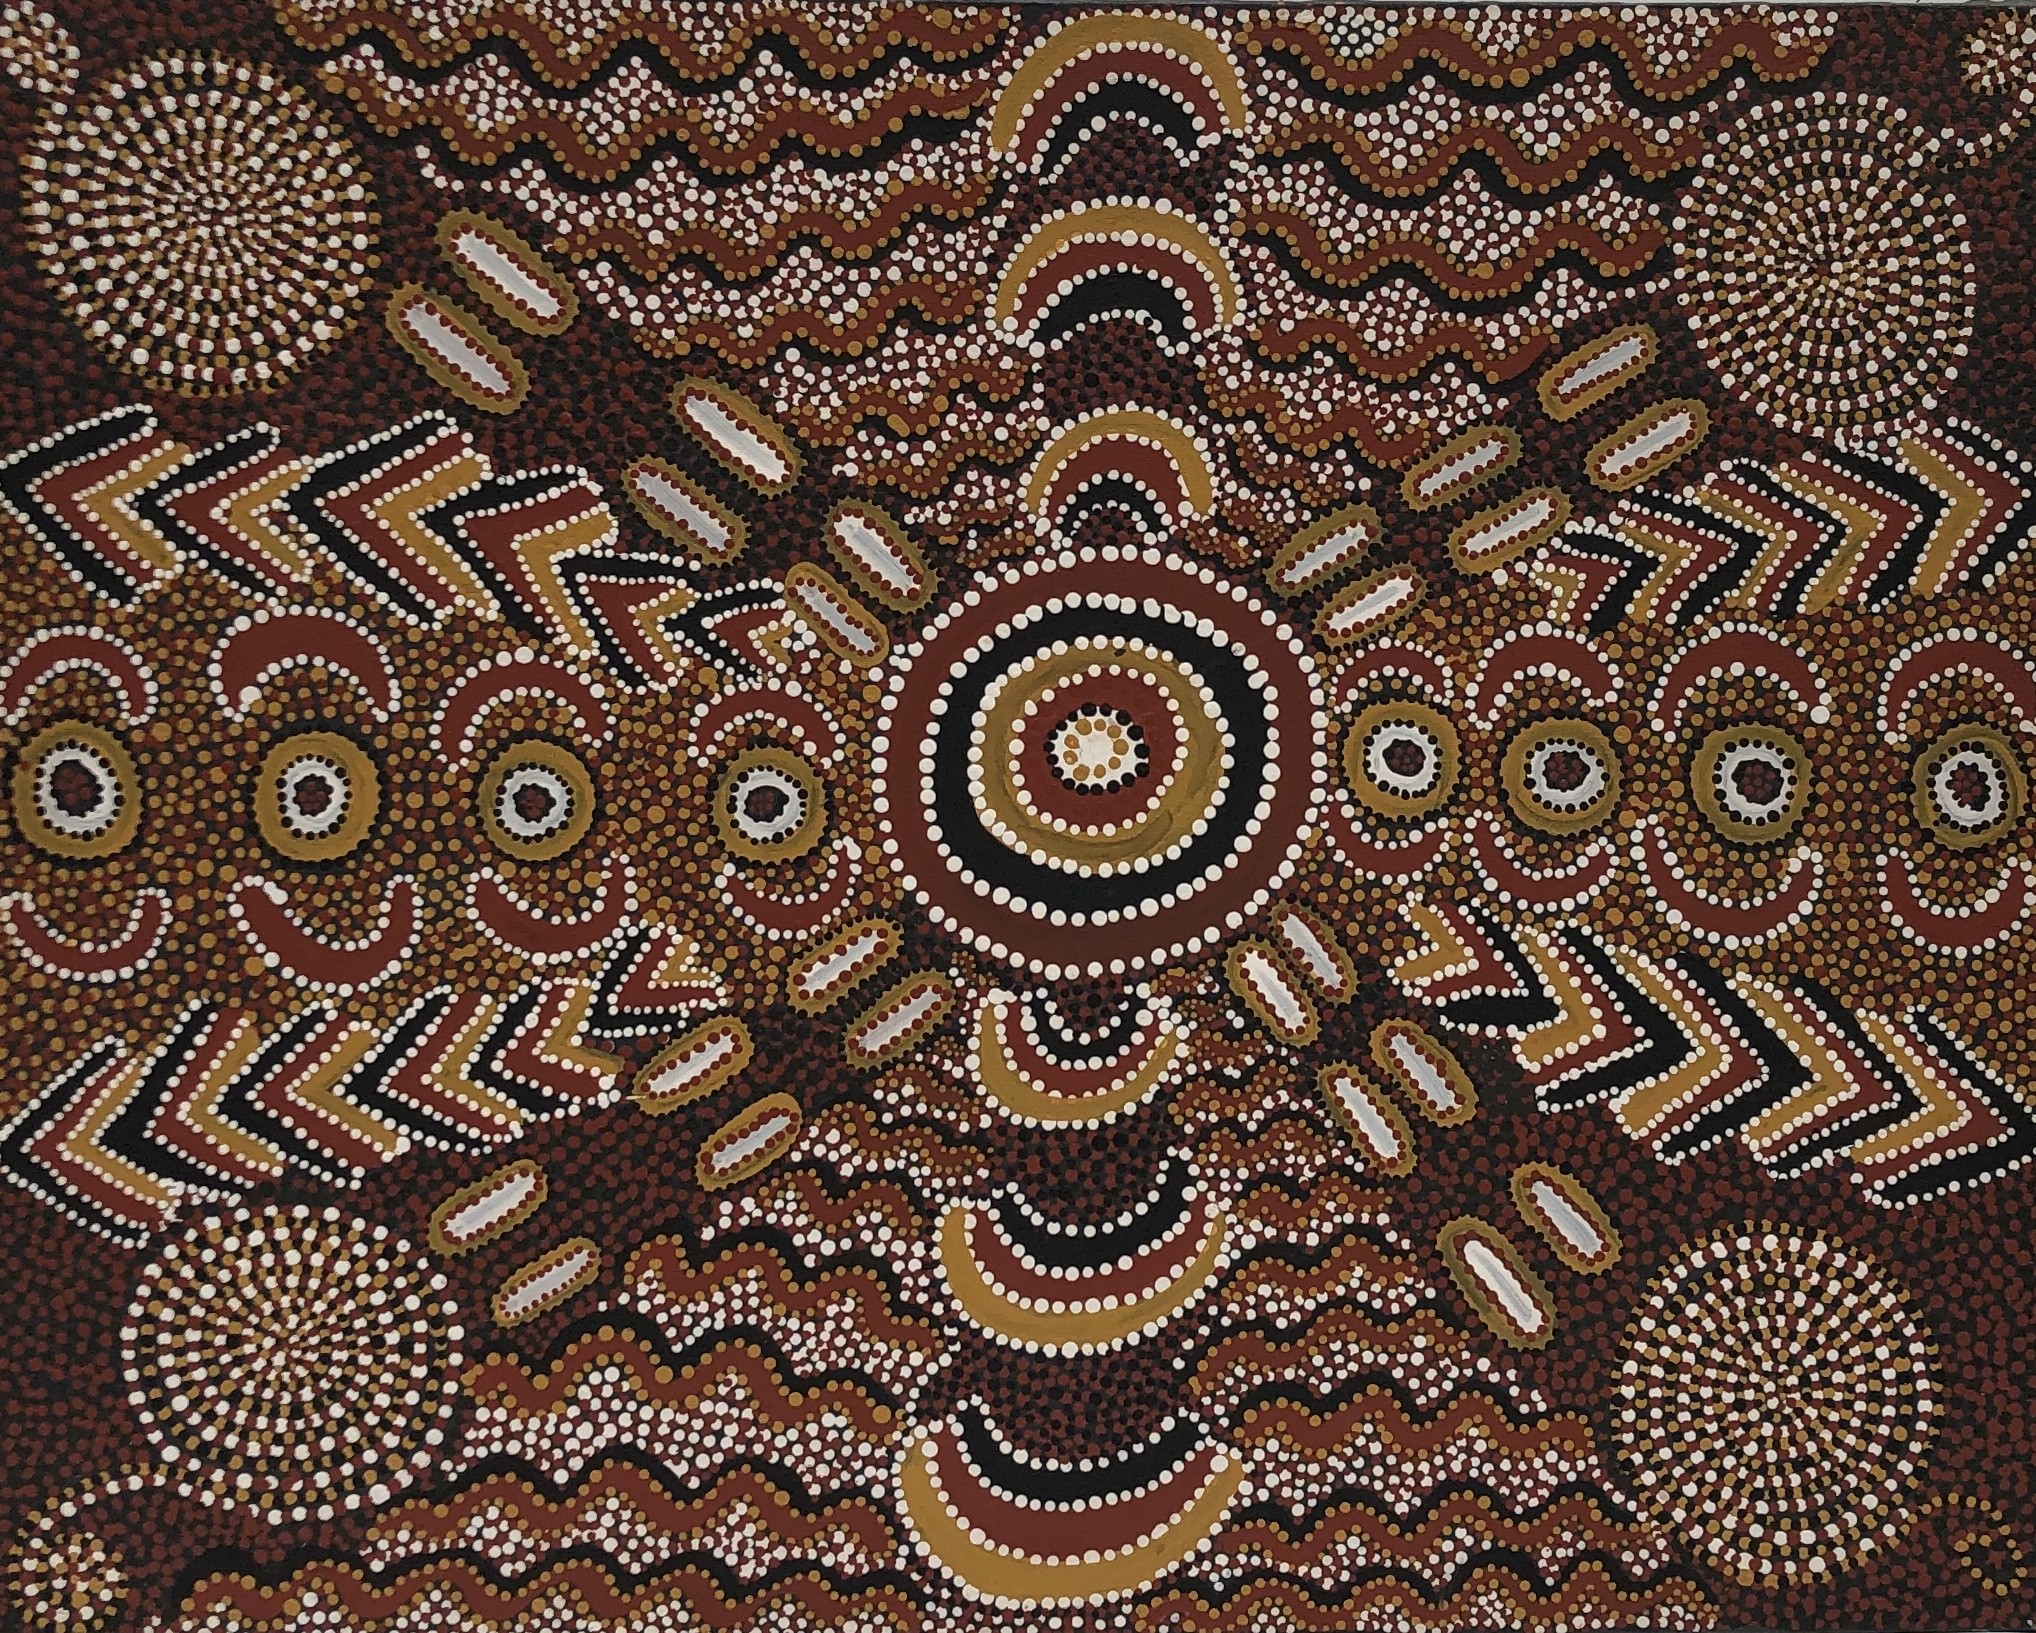 untitled-aboriginal-dot-painting-by-margaret-turner-petyarre-the